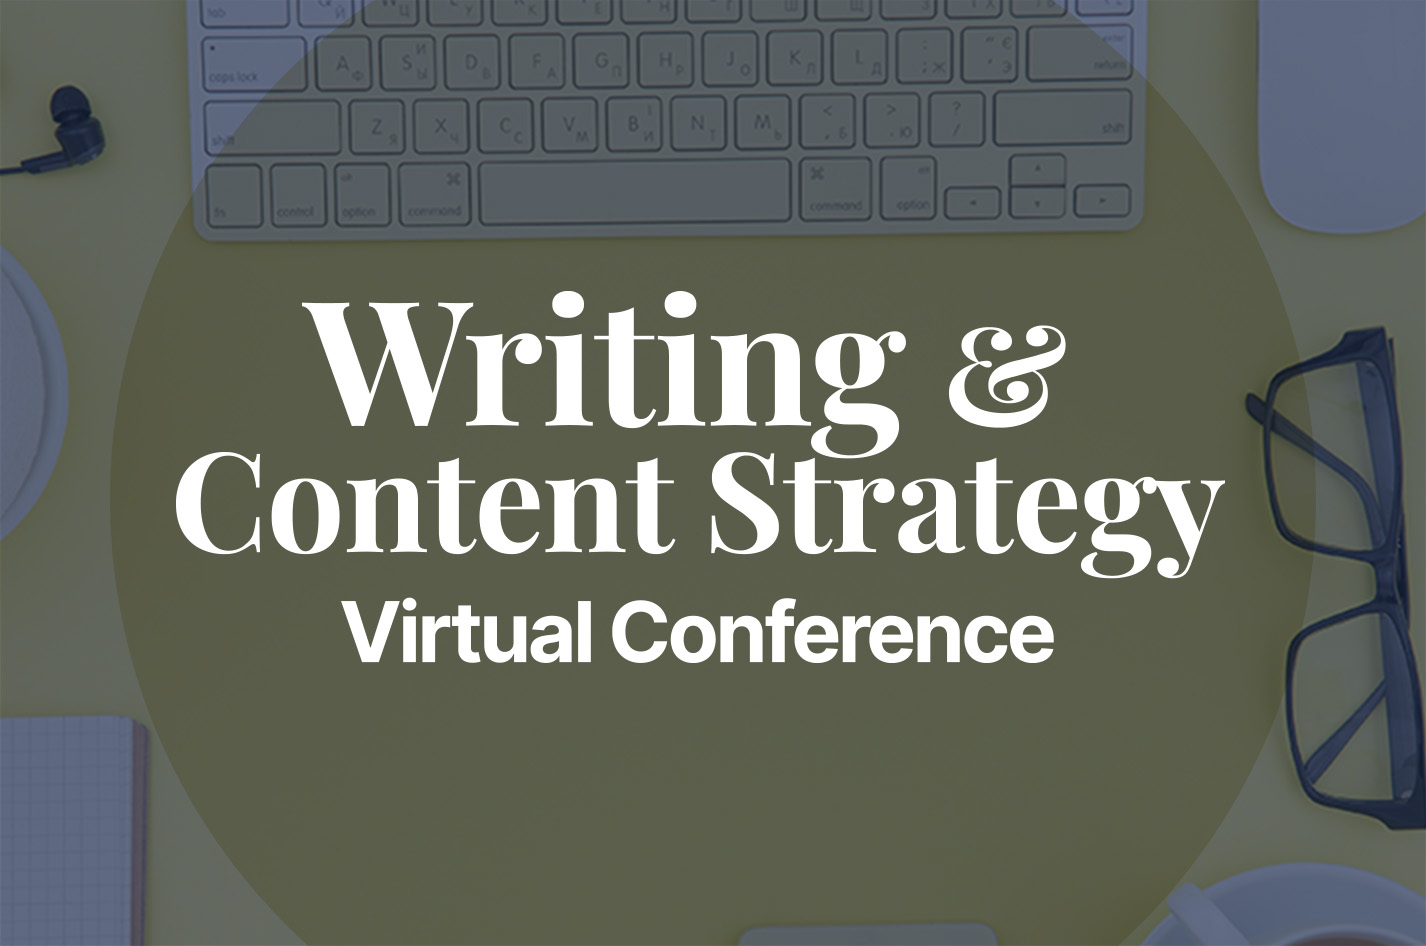 Writing and Content Strategy